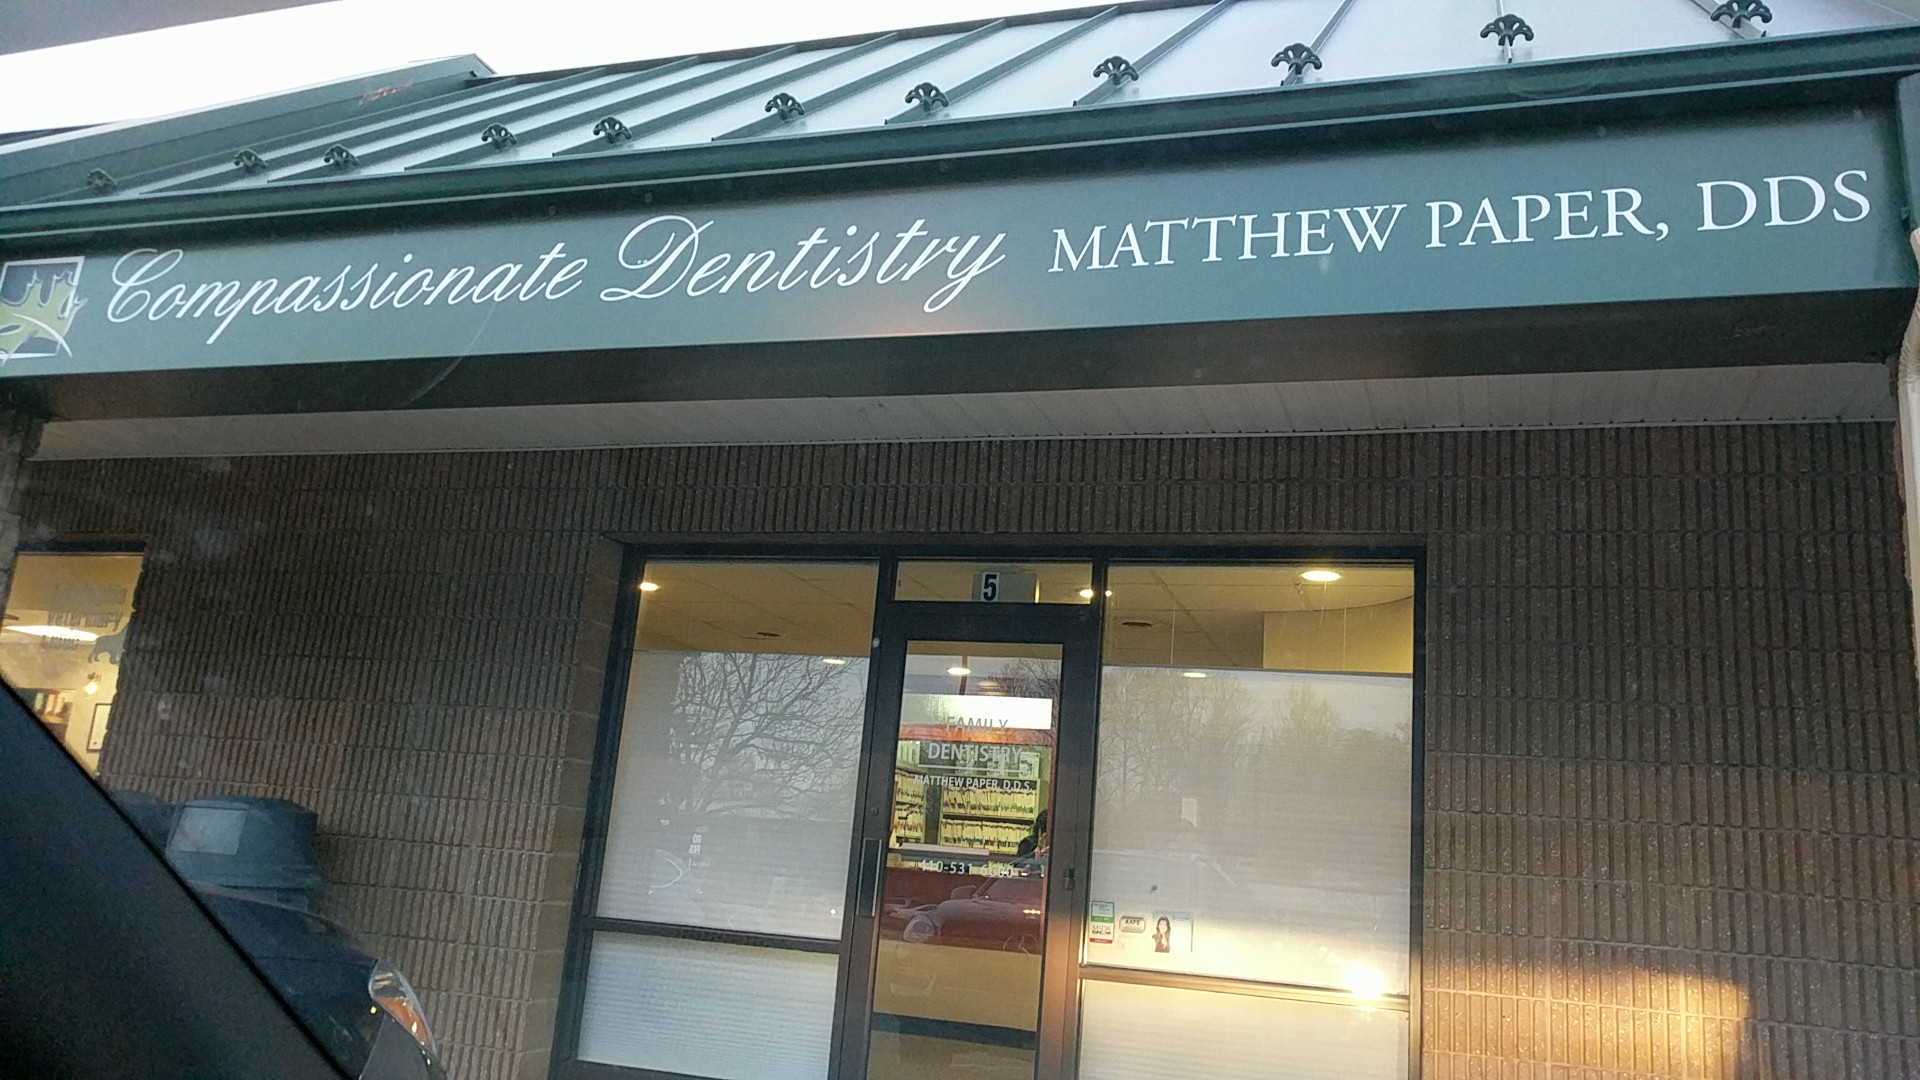 Compassionate Dentistry / Matthew Paper, DDS